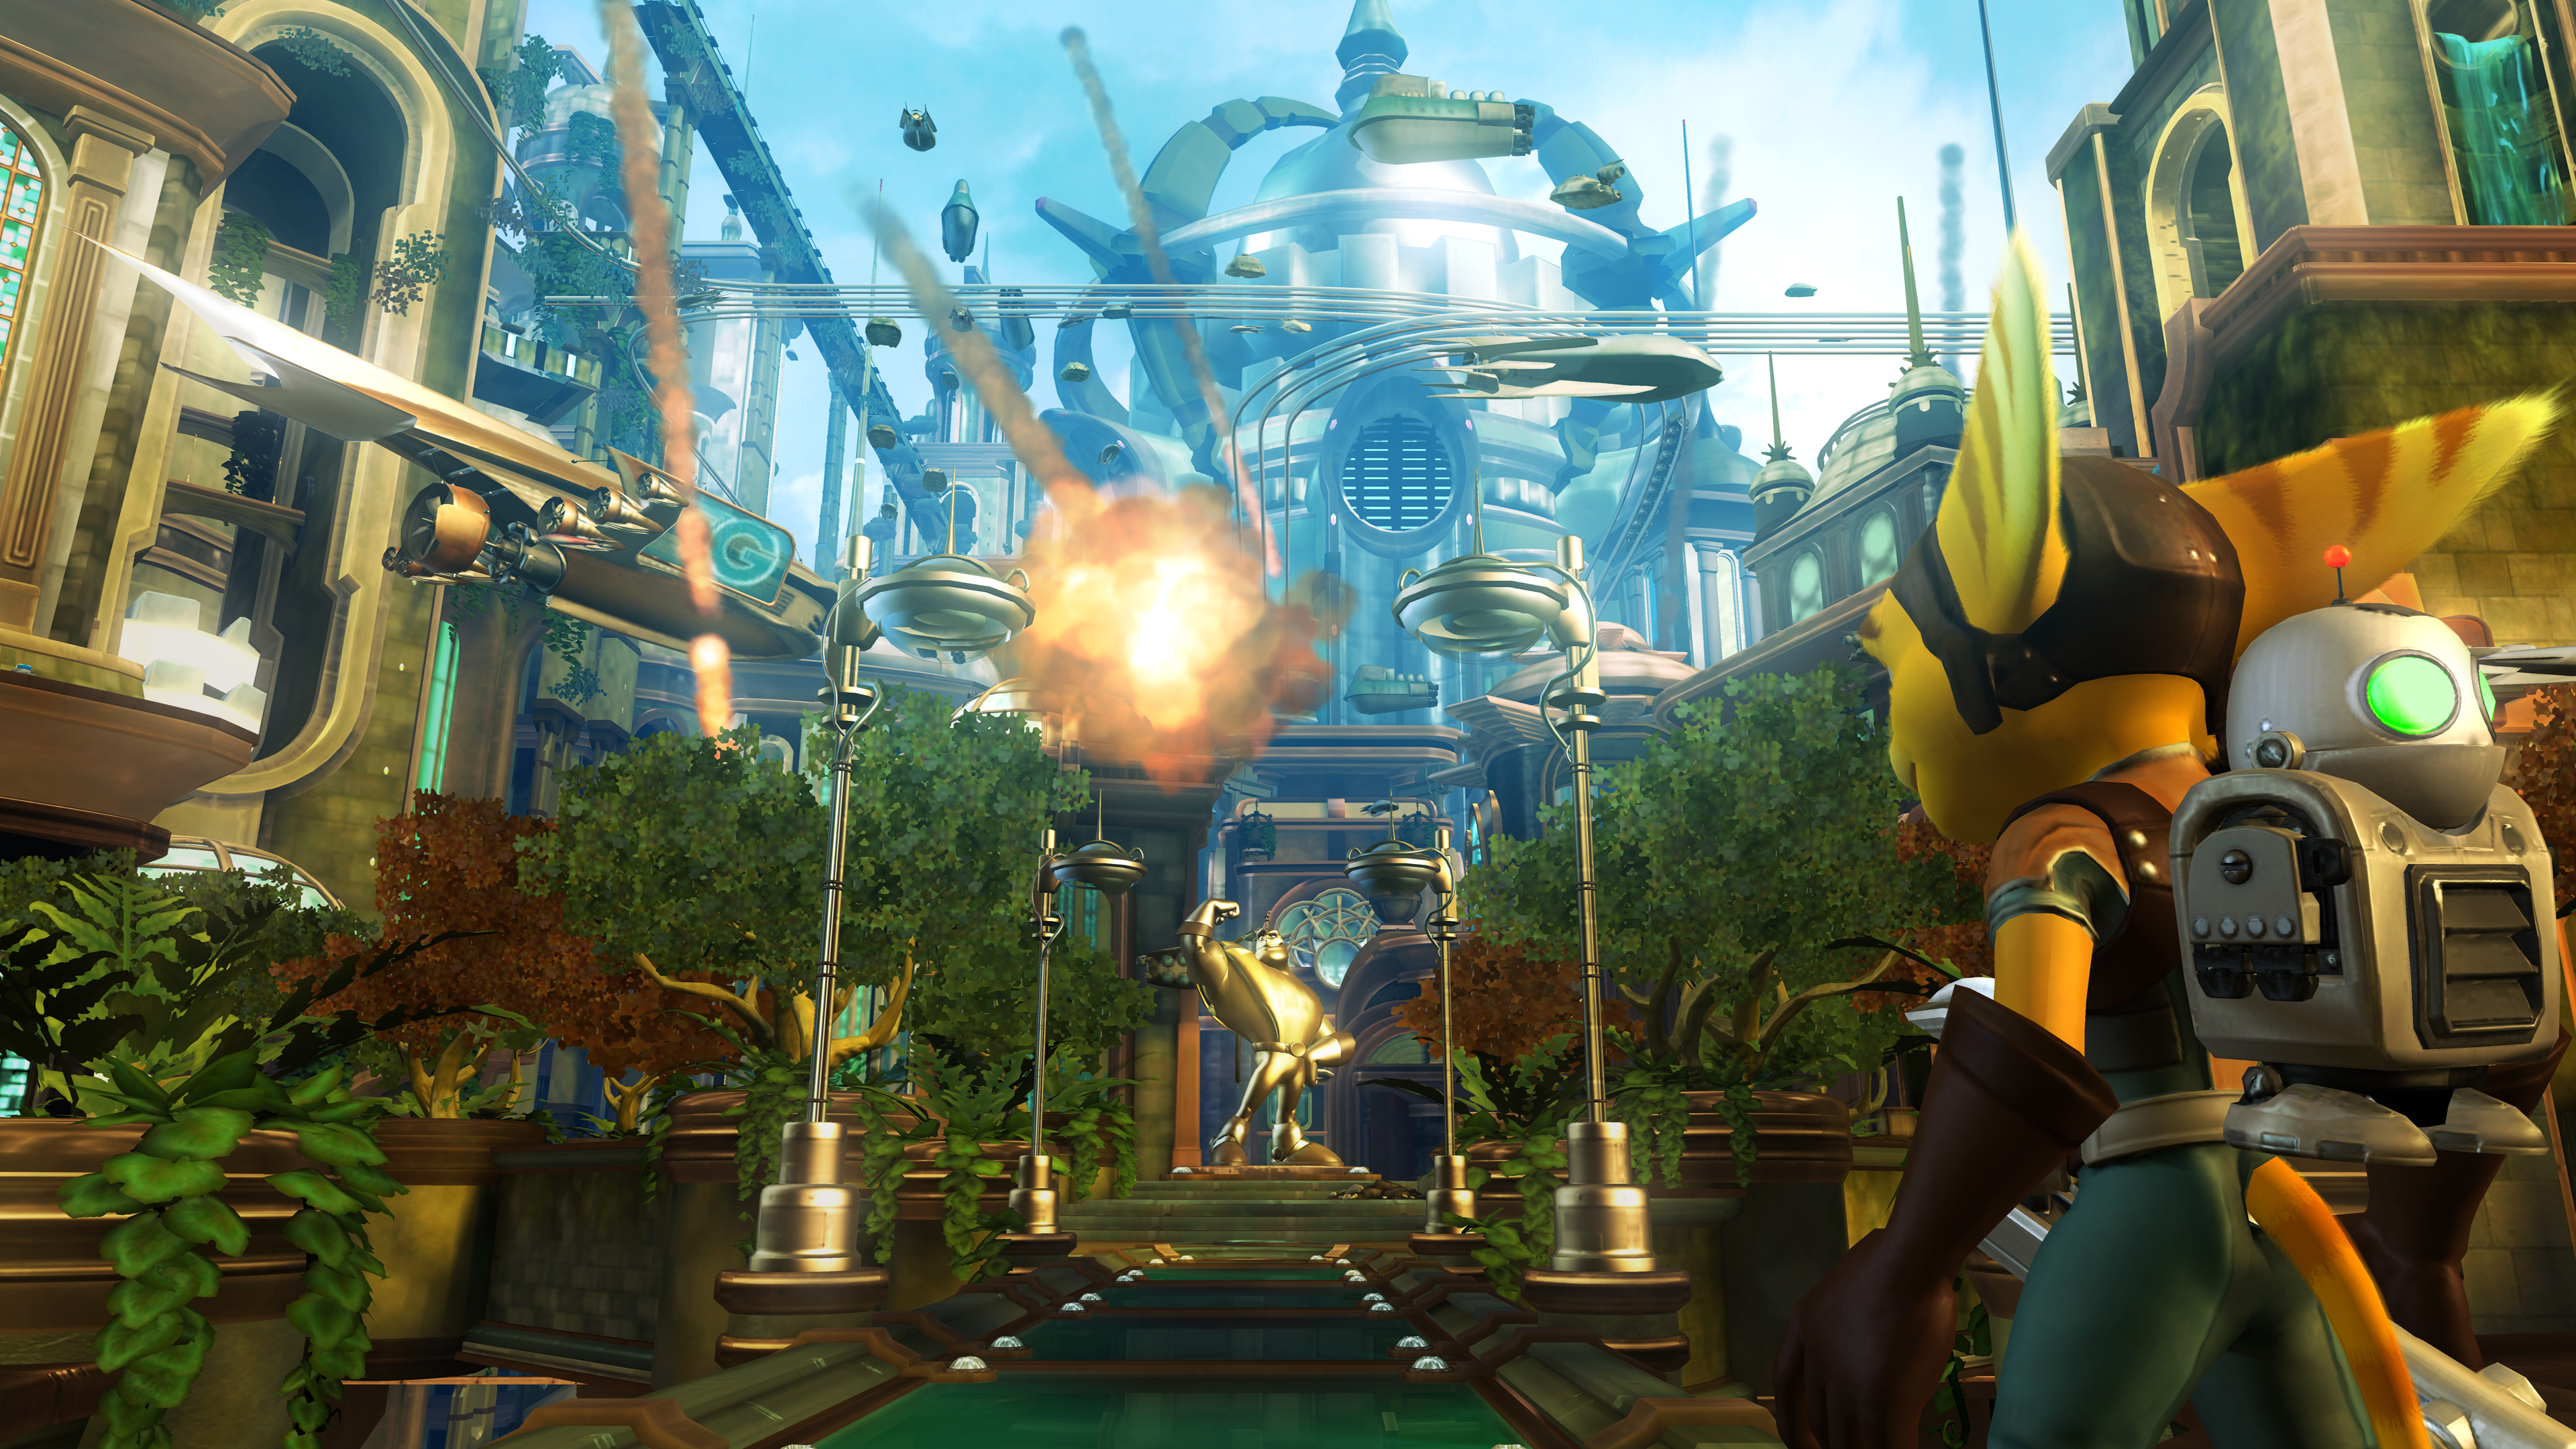 clank wallpapers ratchet and clank pictures ratchet and clank pictures